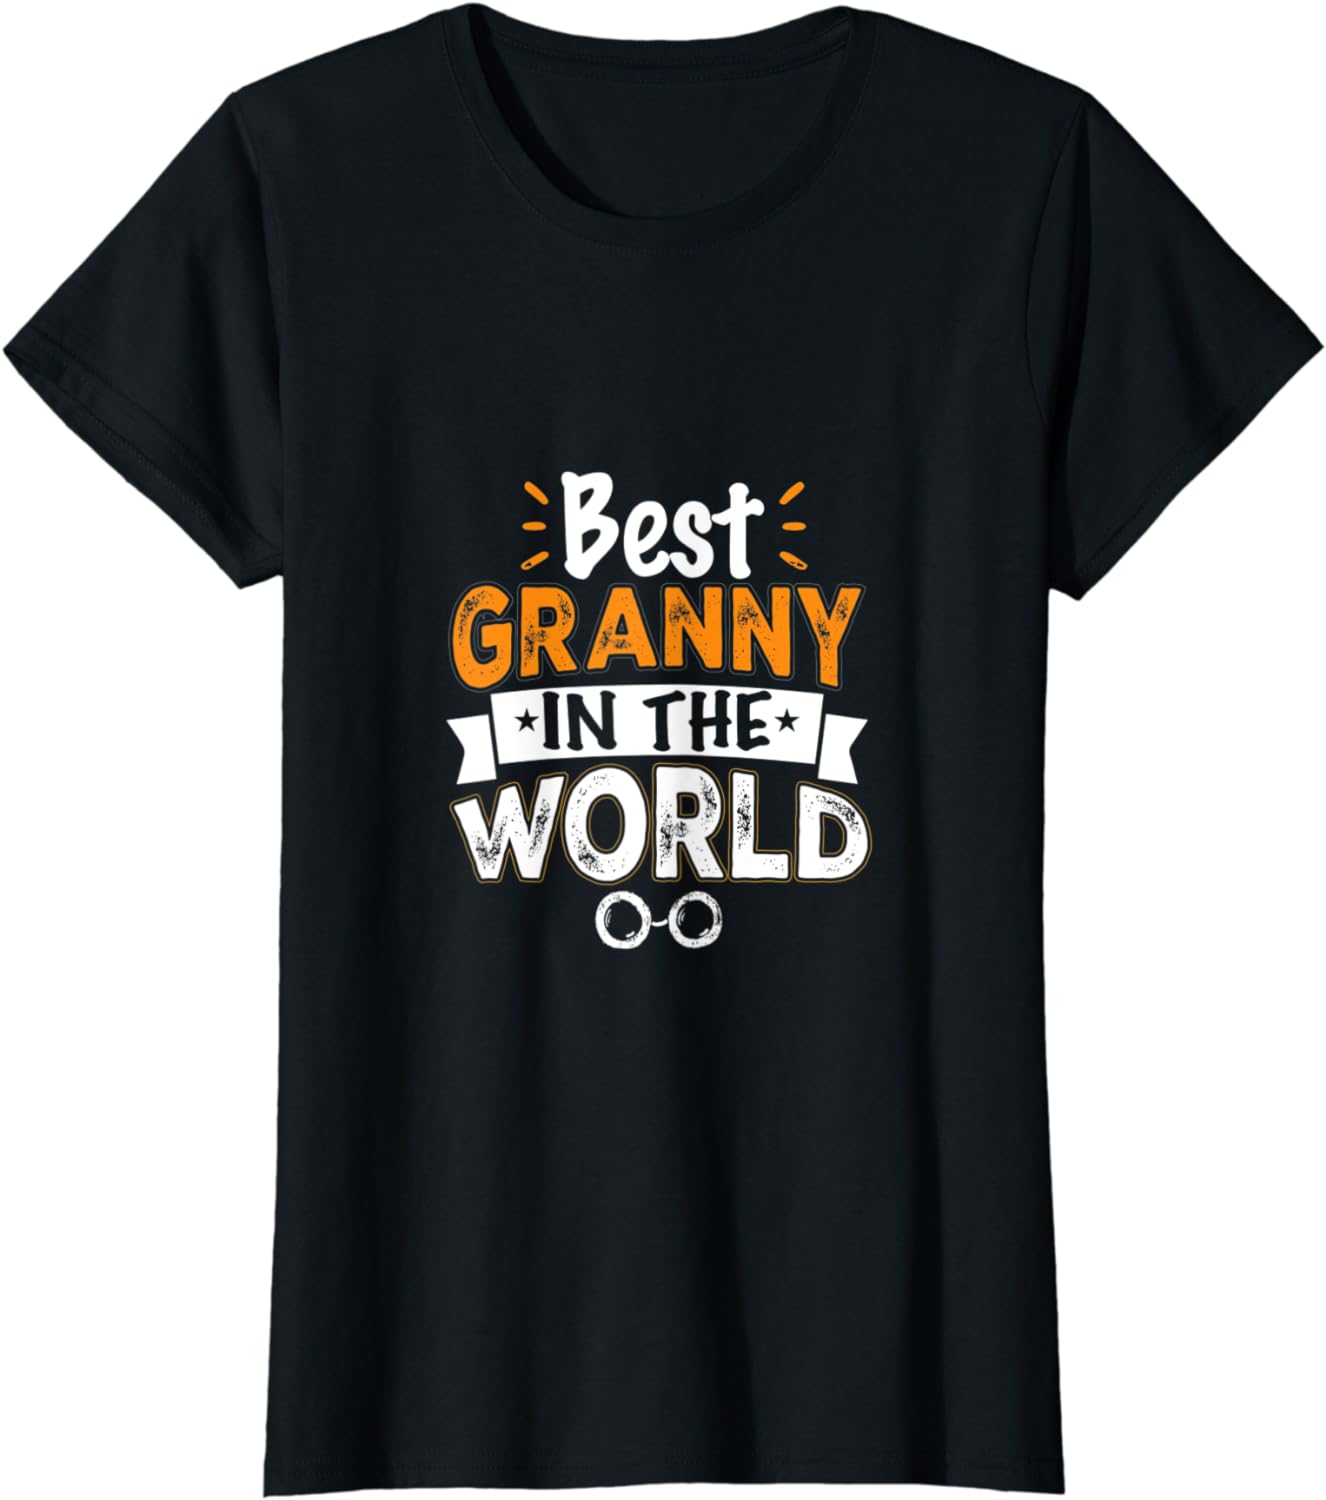 Best Granny in the World T-Shirt